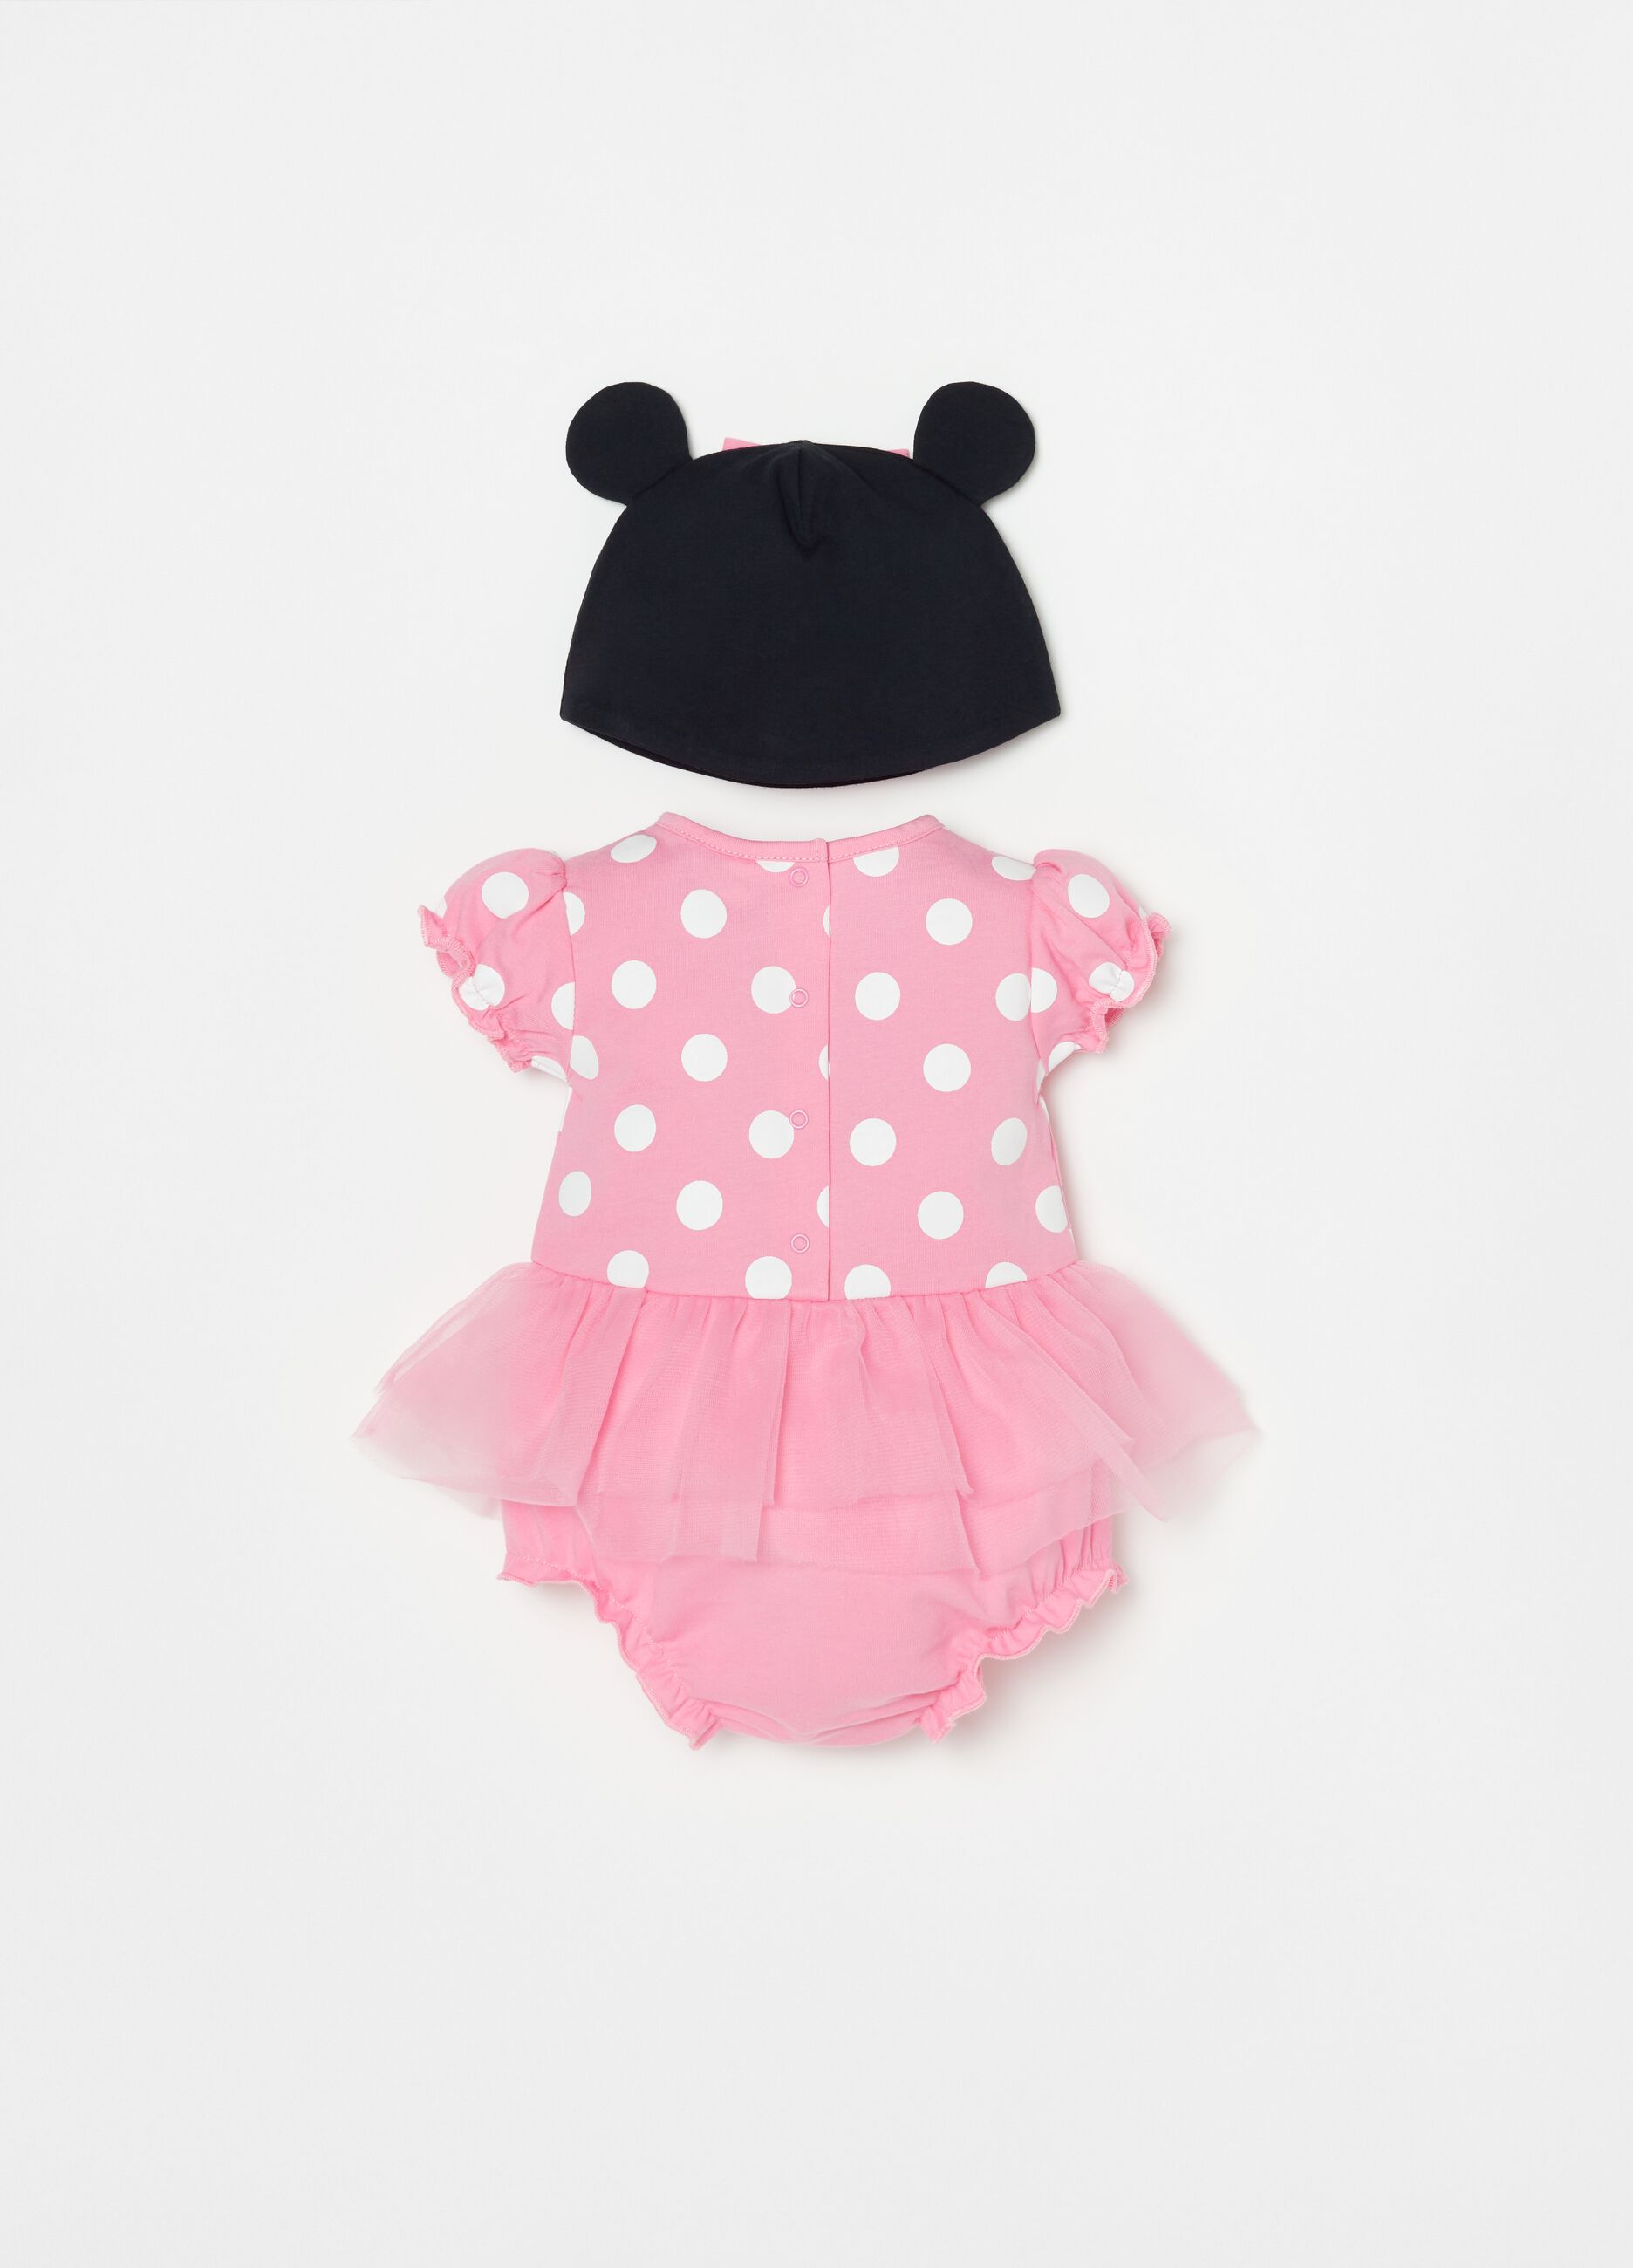 Disney Baby Minnie Mouse romper suit and hat set